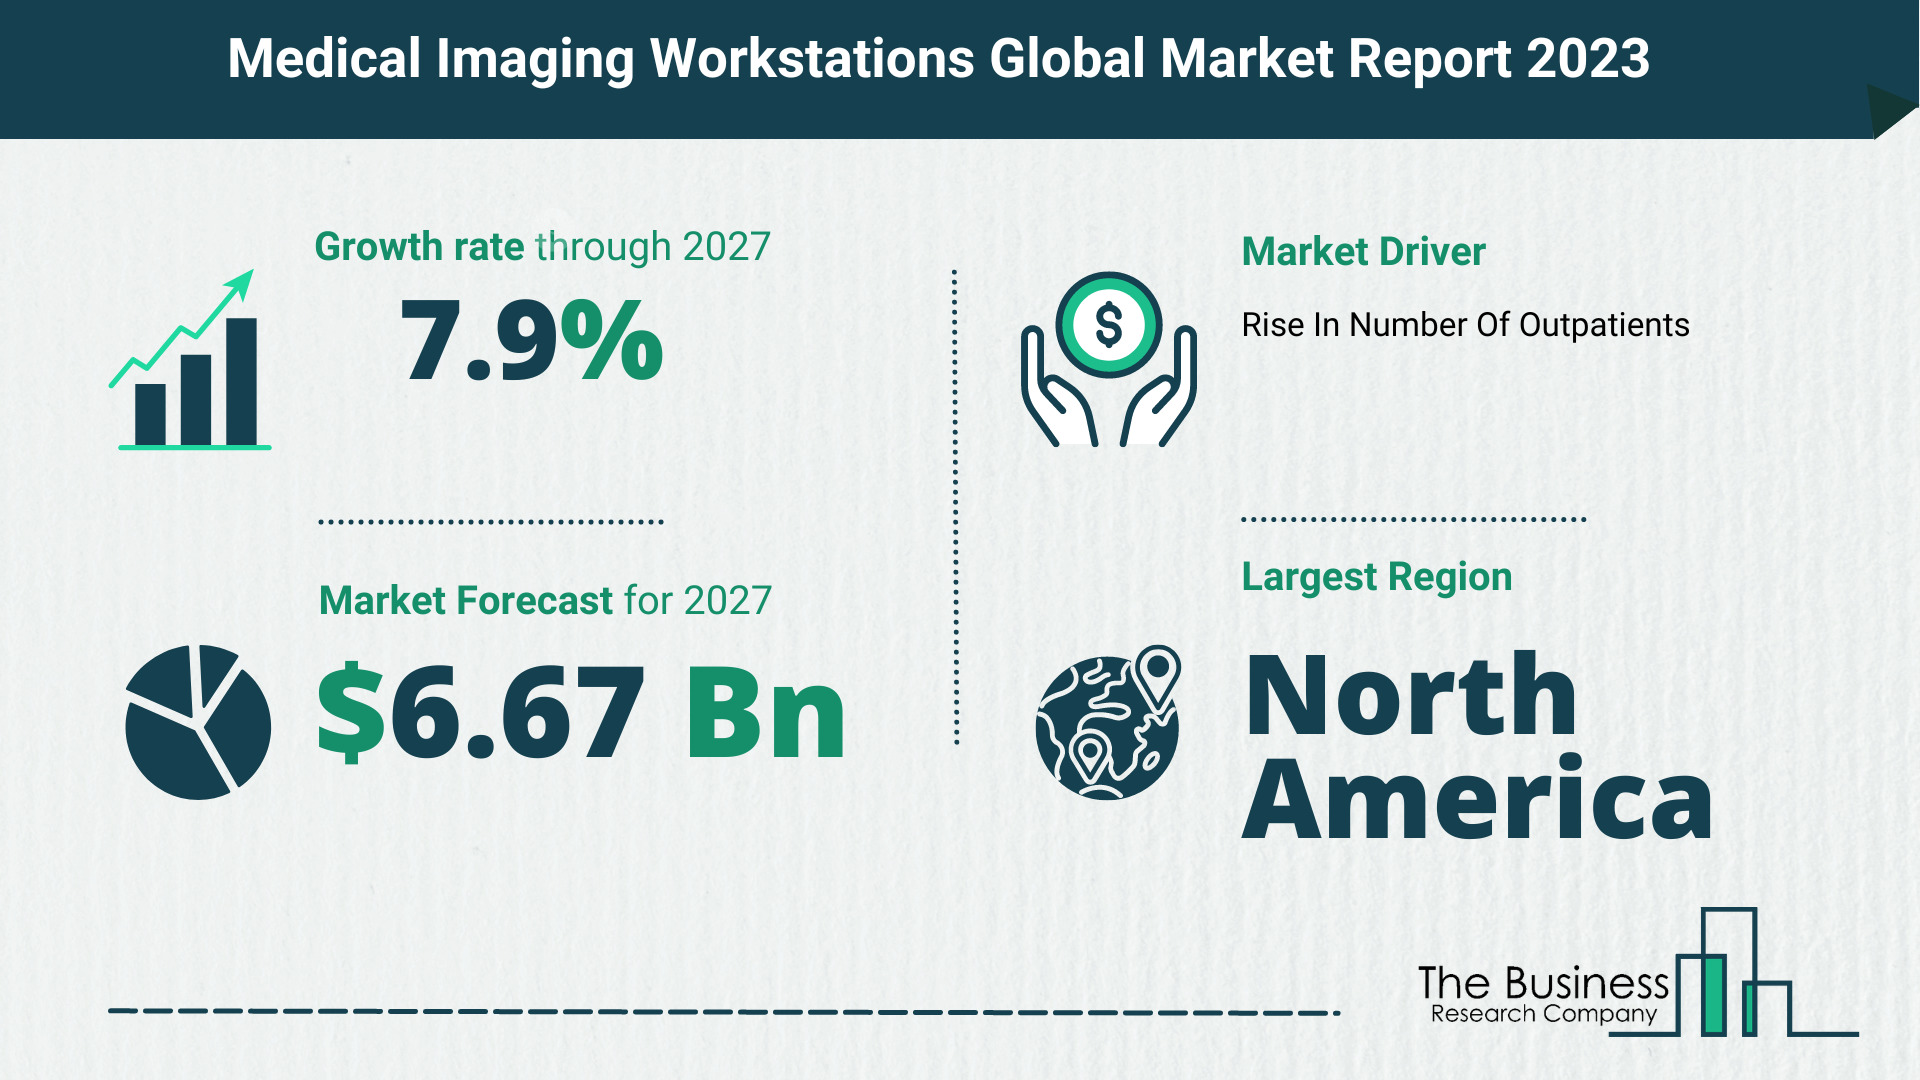 How Will The Medical Imaging Workstations Market Globally Expand In 2023?